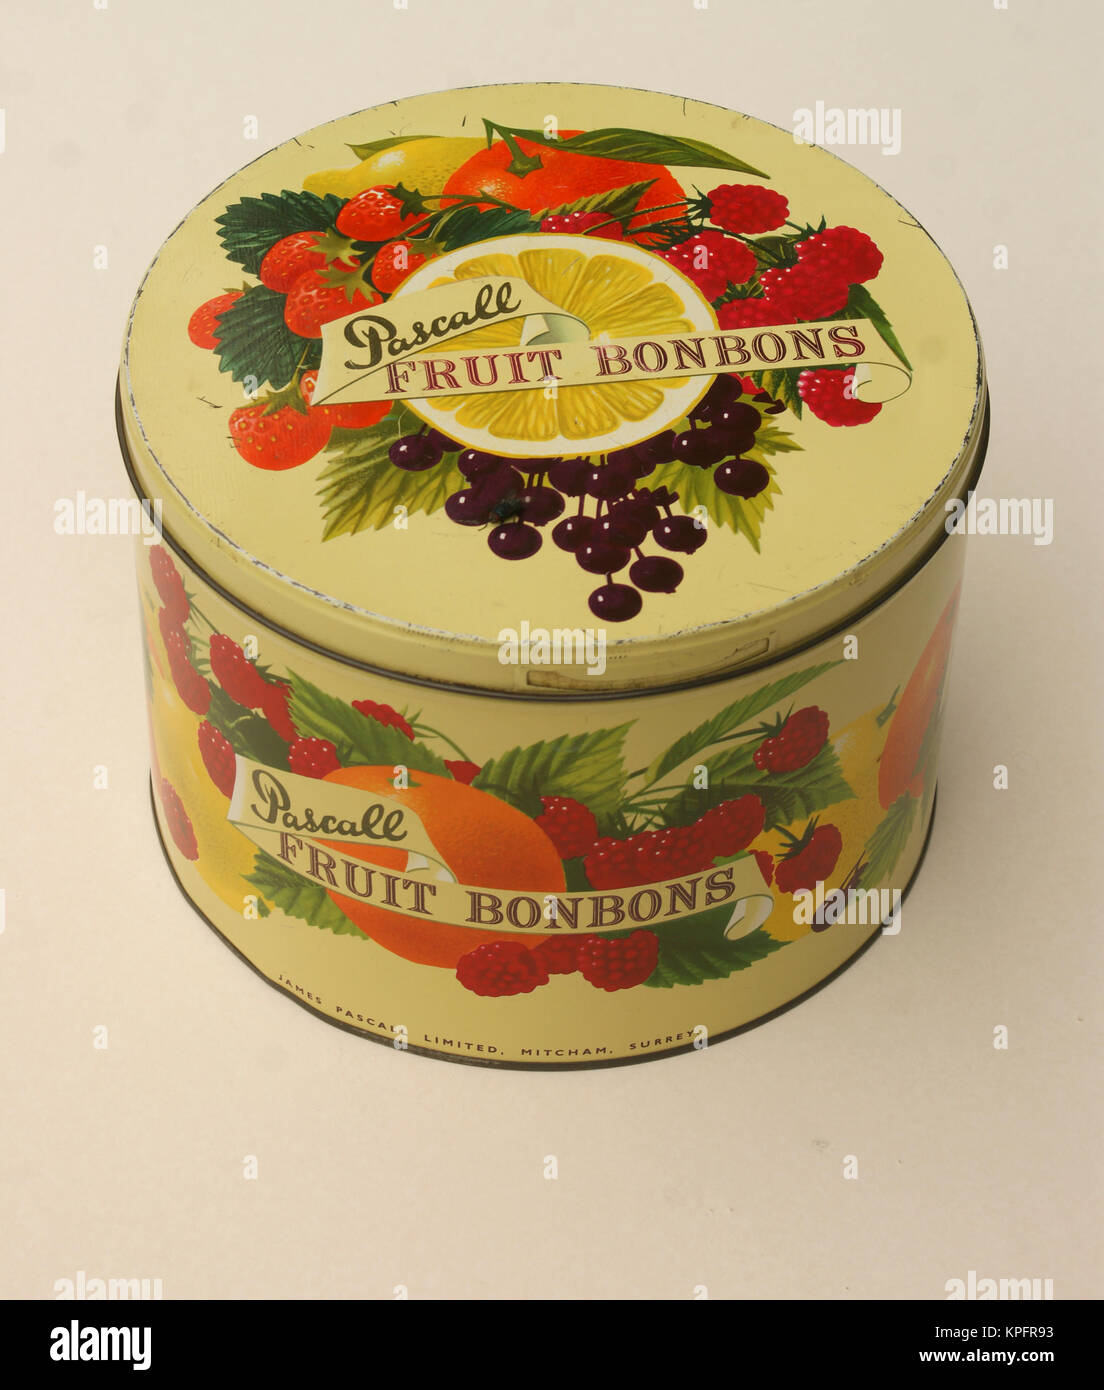 Pascall Fruit Bon Bons. Vintage retro sweet tins, confectionary, 1950s. These tins were displayed in confectionary shops, and contents were sold to customers. The tin was returned to the maker for a deposit. Many have found other uses for storage in later years. Stock Photo